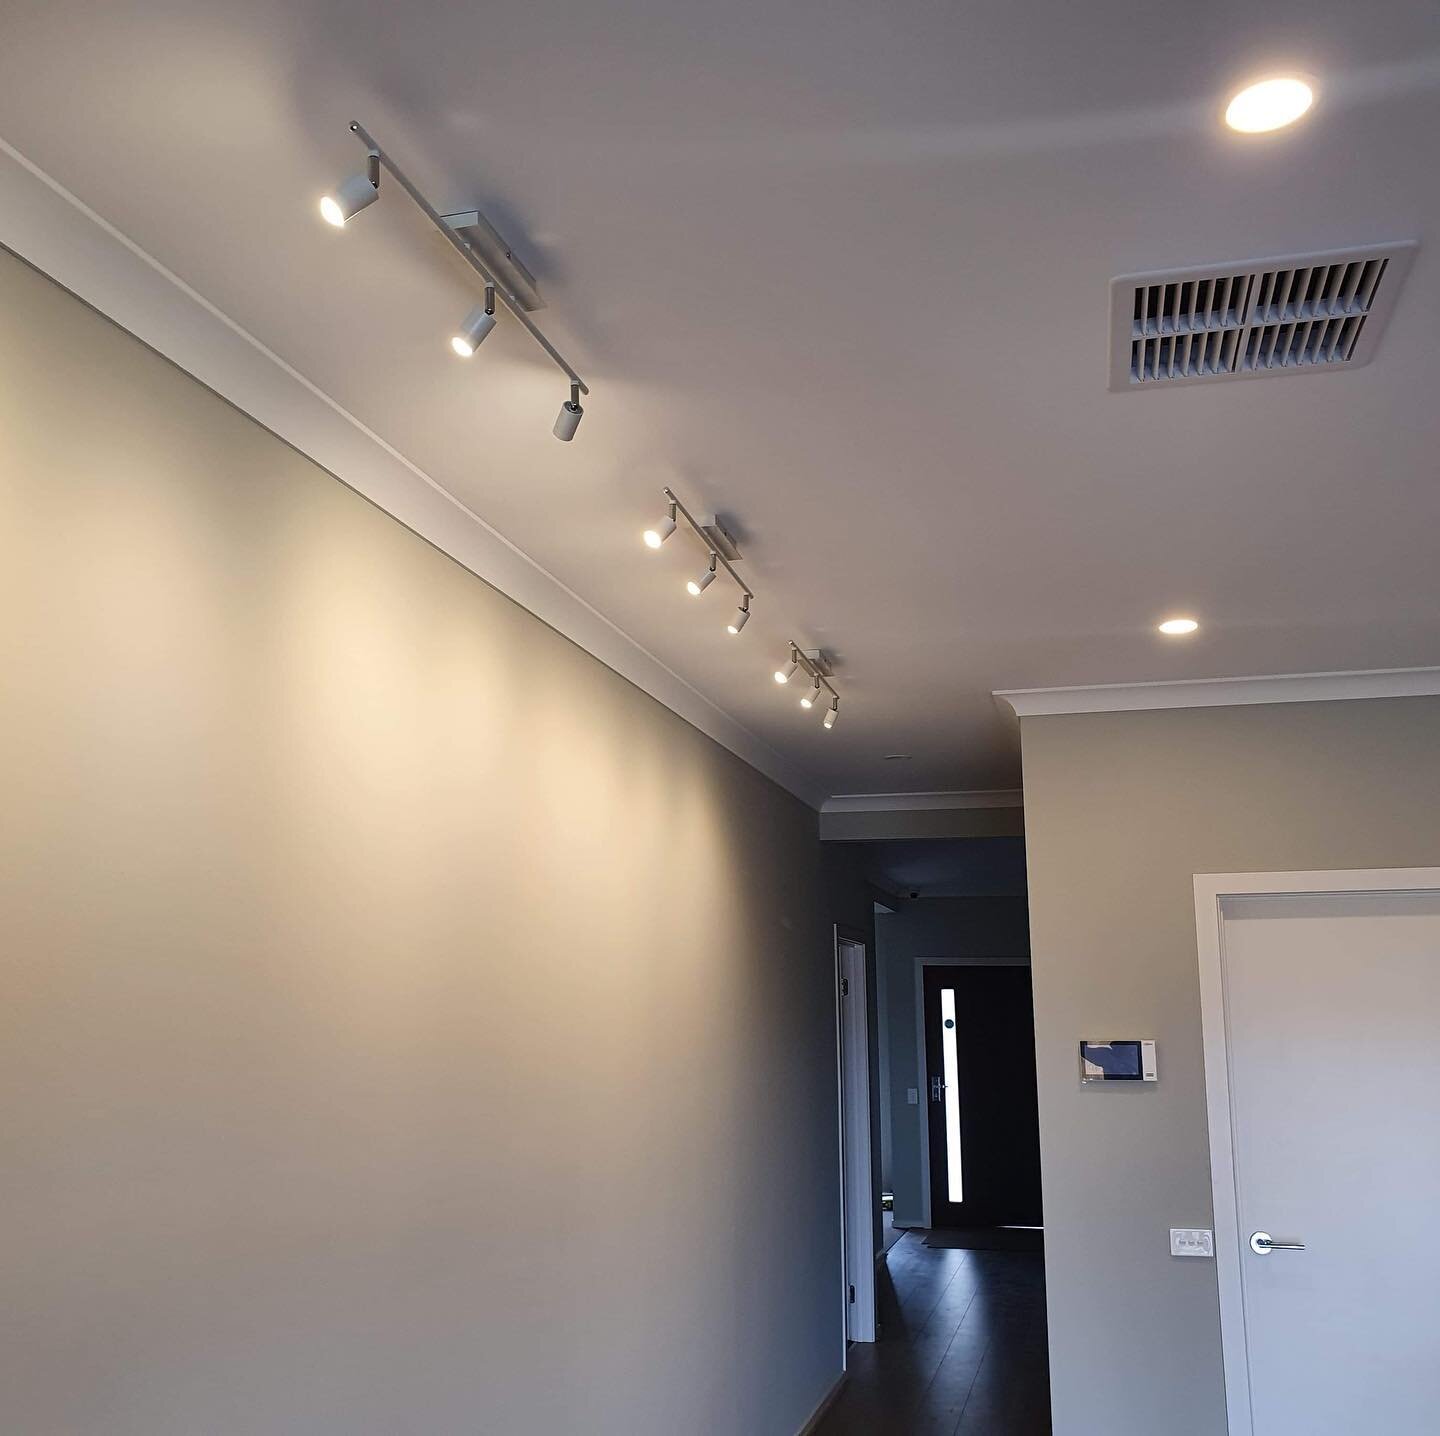 Track lighting and down lights installed today ✅ 

#elec #melbourneelectrician #electrician #electricians #electrical #contractor #renovation #sparky #sparkie #jobsite #job #worksite #construction #trade #tradie #work #home #developer #builders #buil